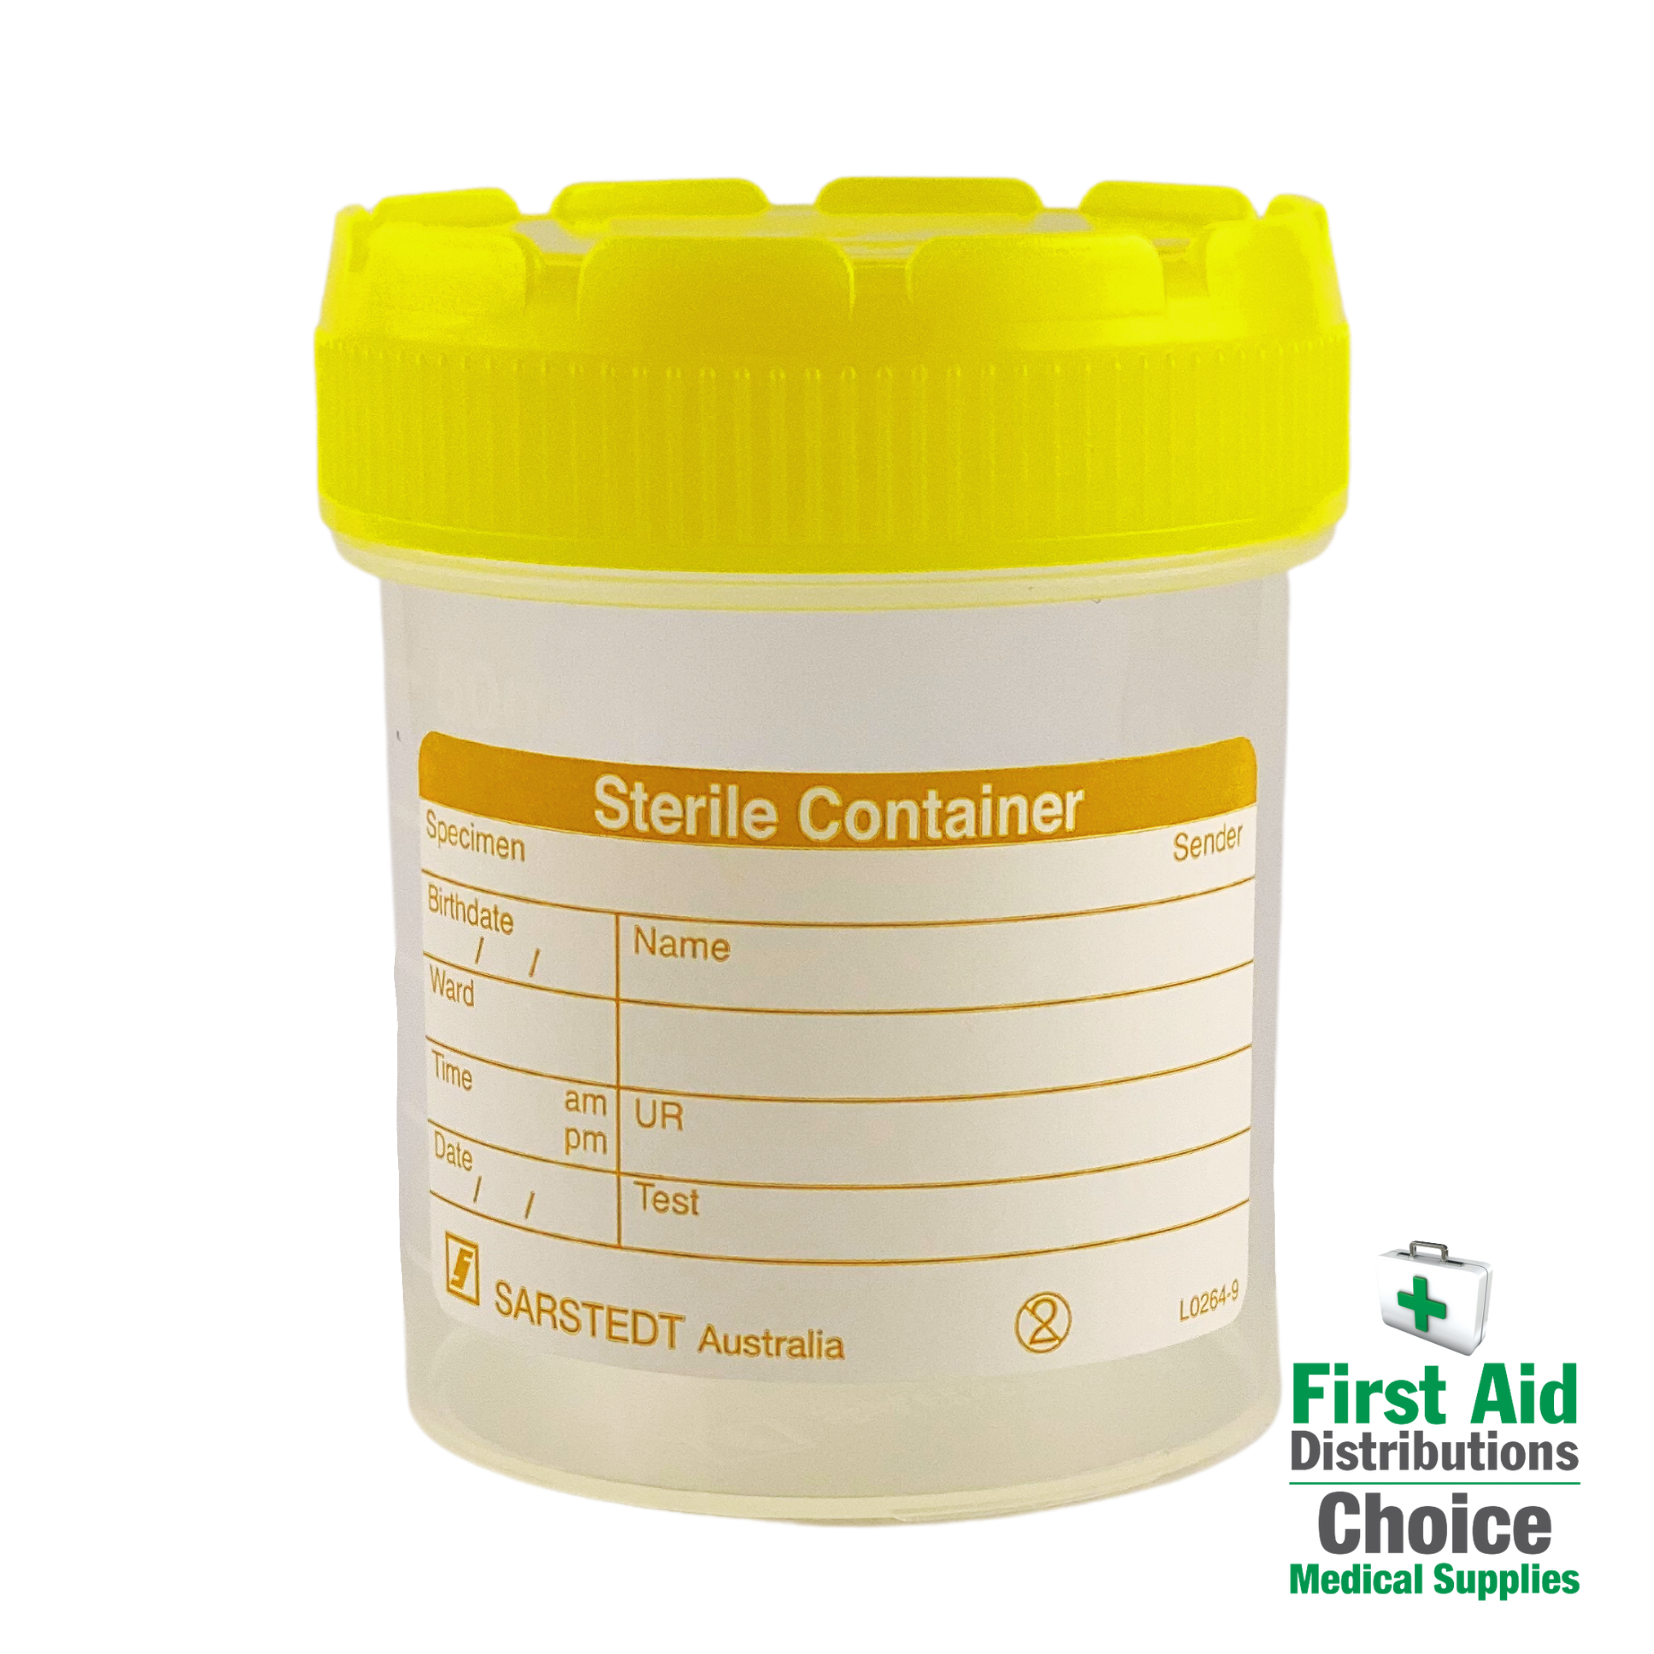 collections/Specimen_Container_First_Aid_Distributions_2.png